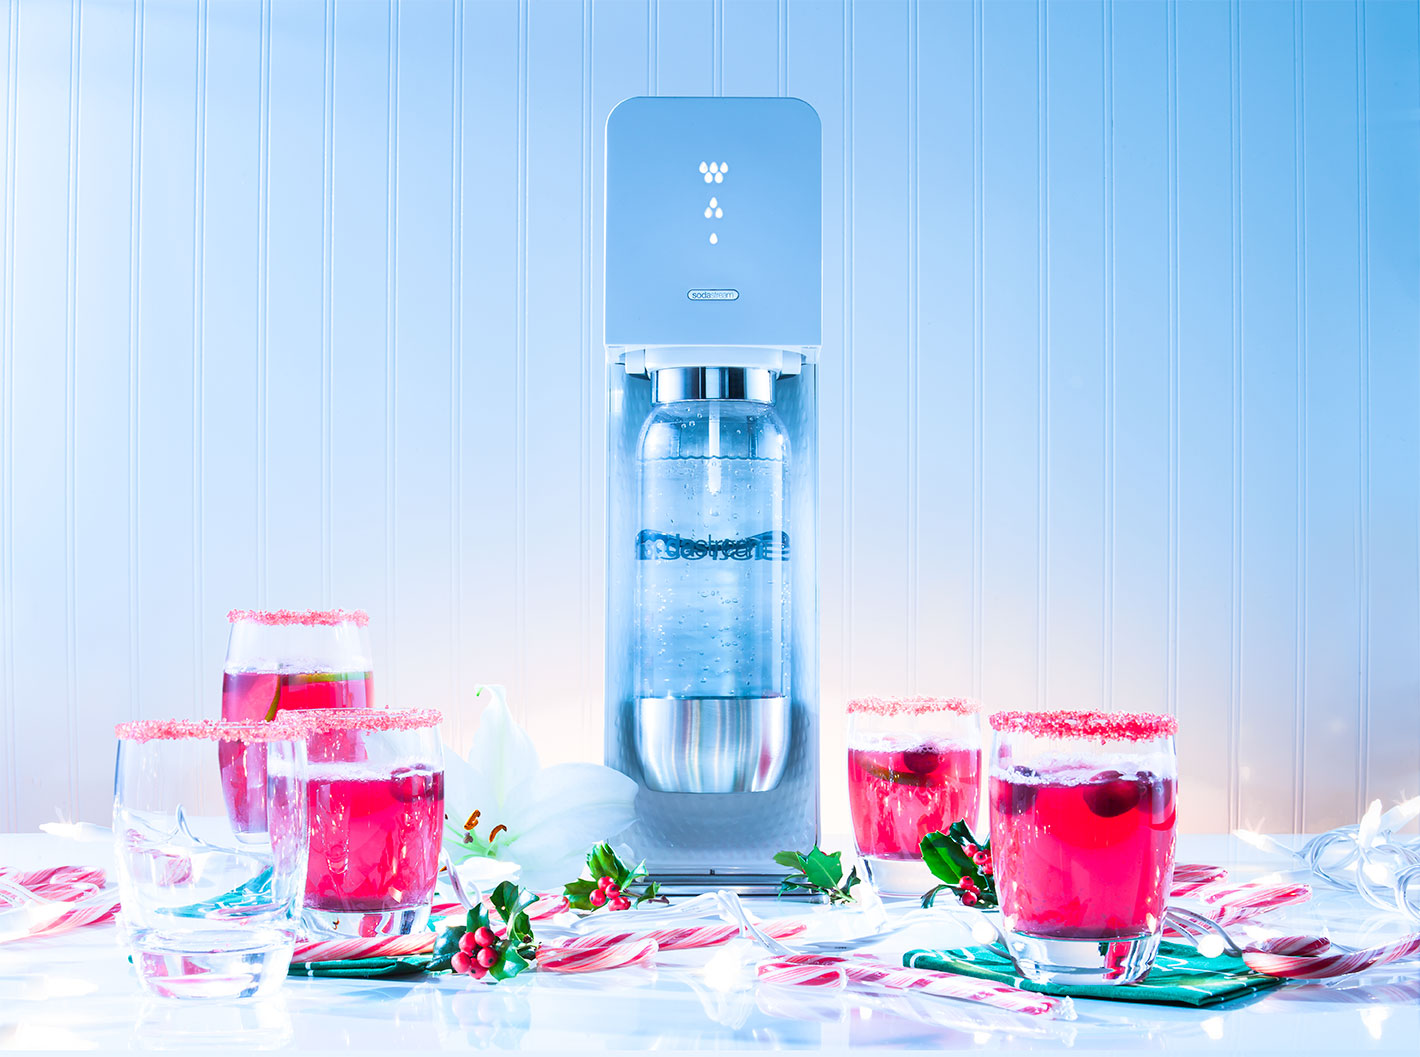 Soda maker with pink drinks 